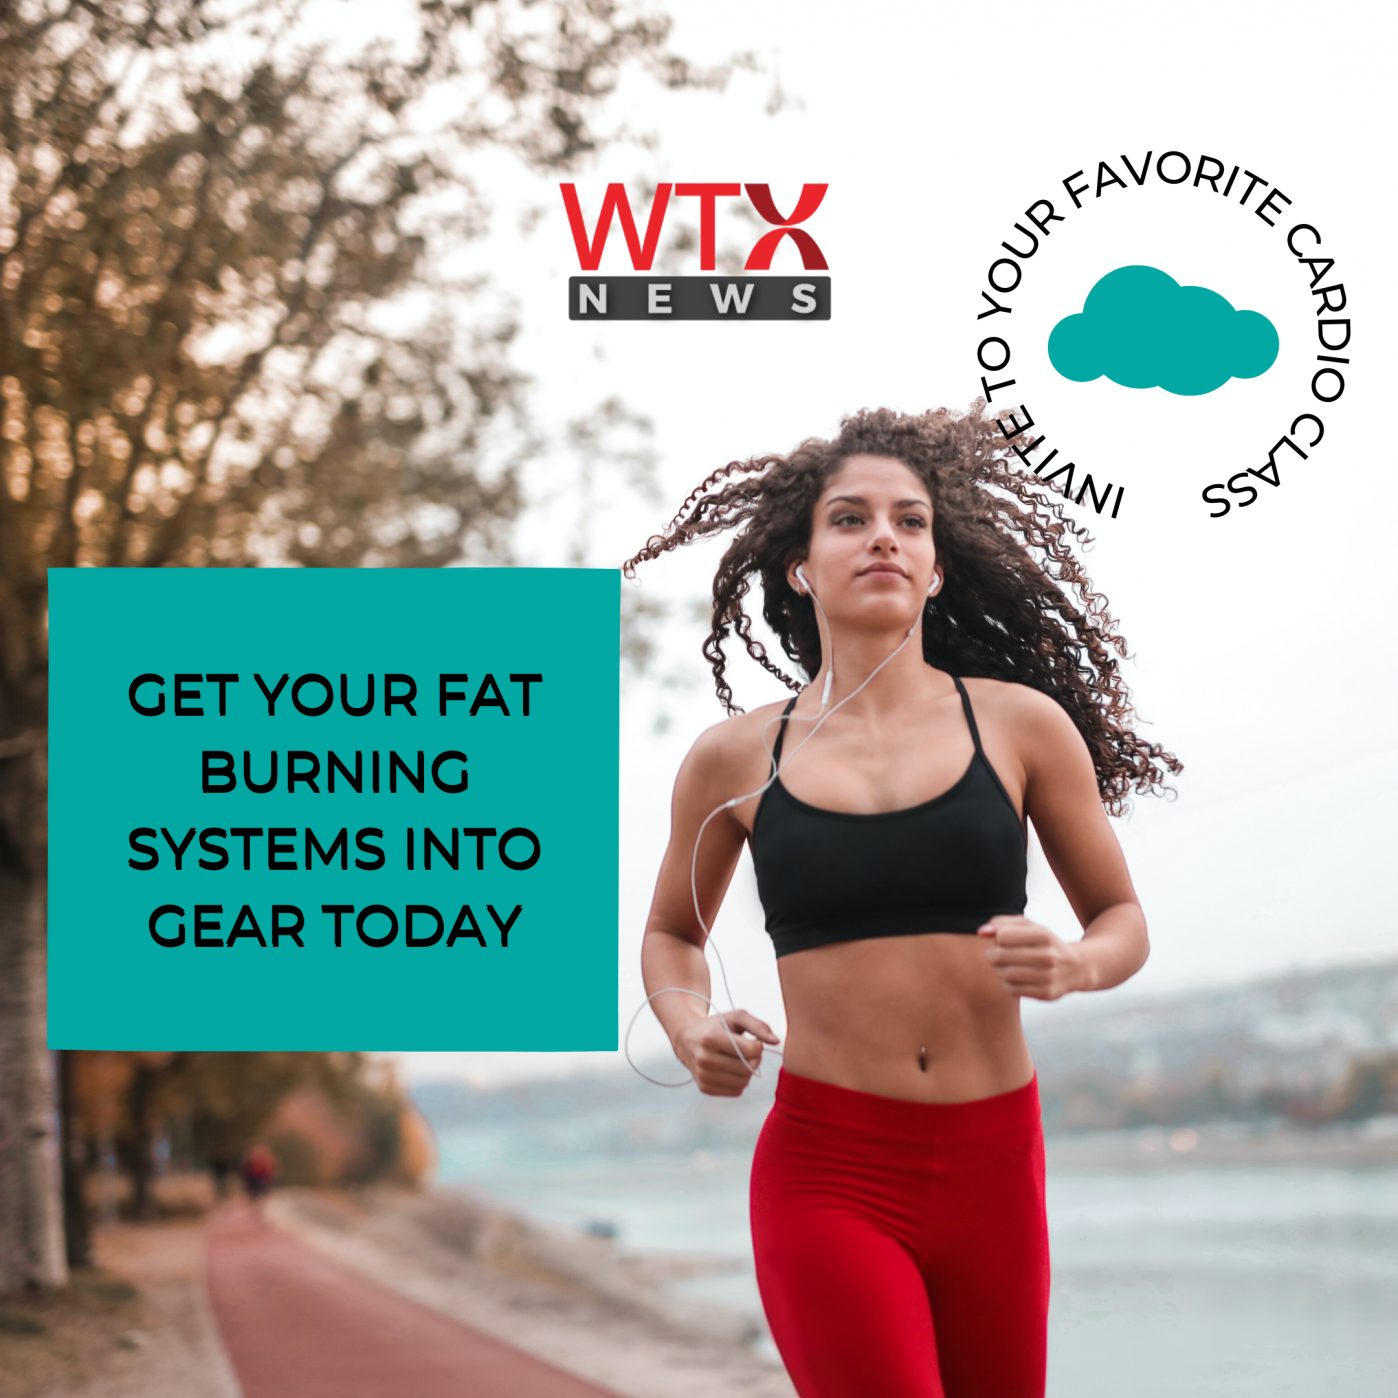 Fat Burning - WTX News Breaking News, fashion & Culture from around the World - Daily News Briefings -Finance, Business, Politics & Sports News